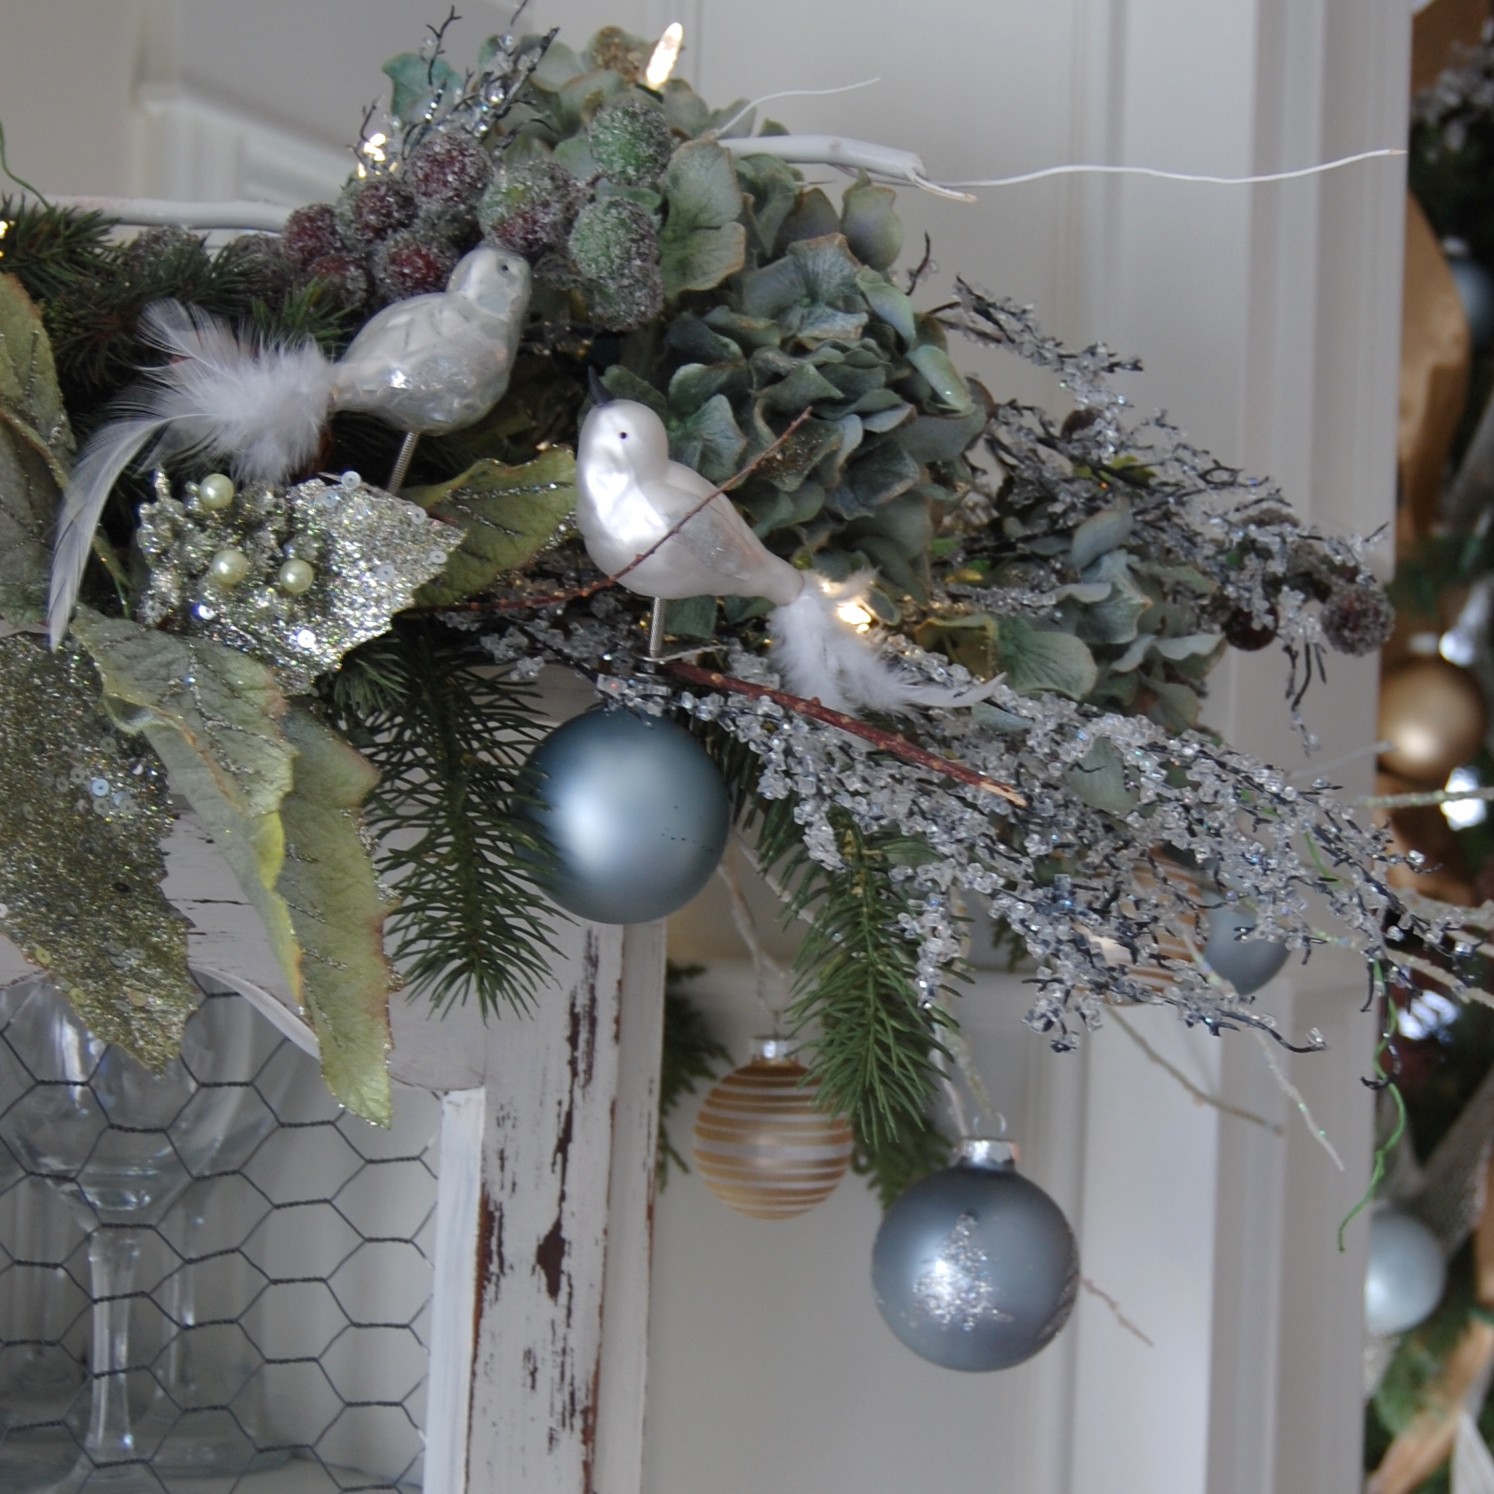 Cabinet-Top Christmas Display (Vignette): Floating Bulbs in Foliage